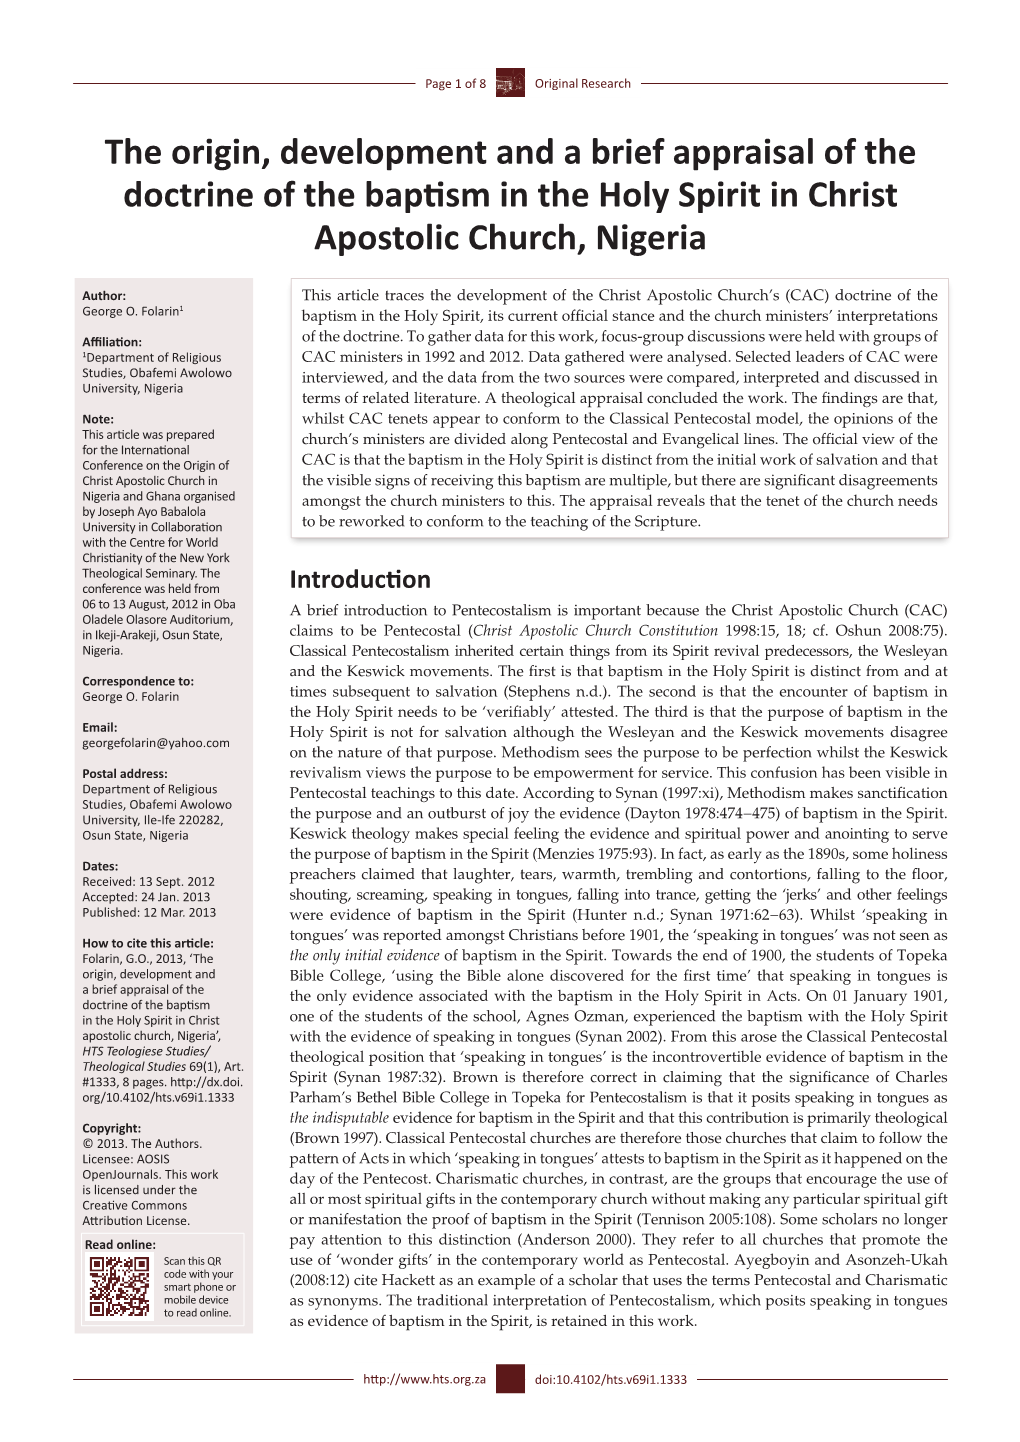 The Origin, Development and a Brief Appraisal of the Doctrine of the Baptism in the Holy Spirit in Christ Apostolic Church, Nigeria